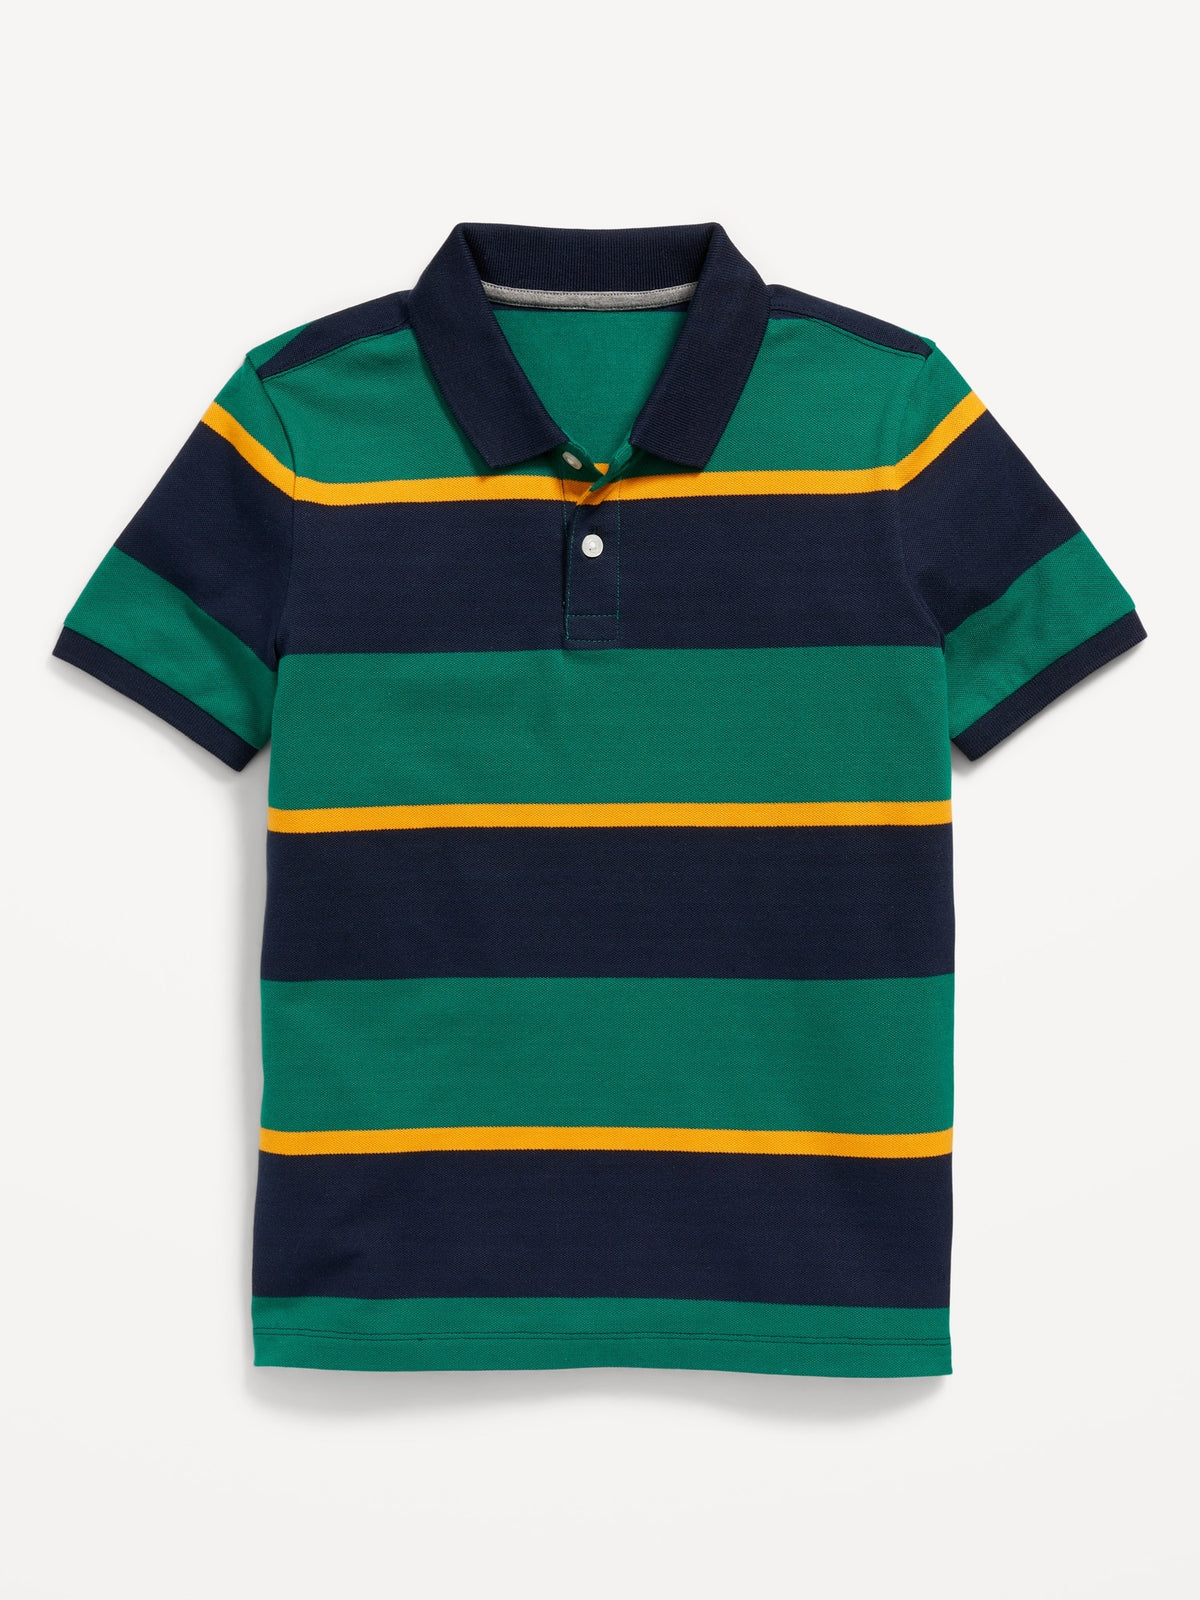 Striped Short-Sleeve Rugby Polo Shirt for Boys